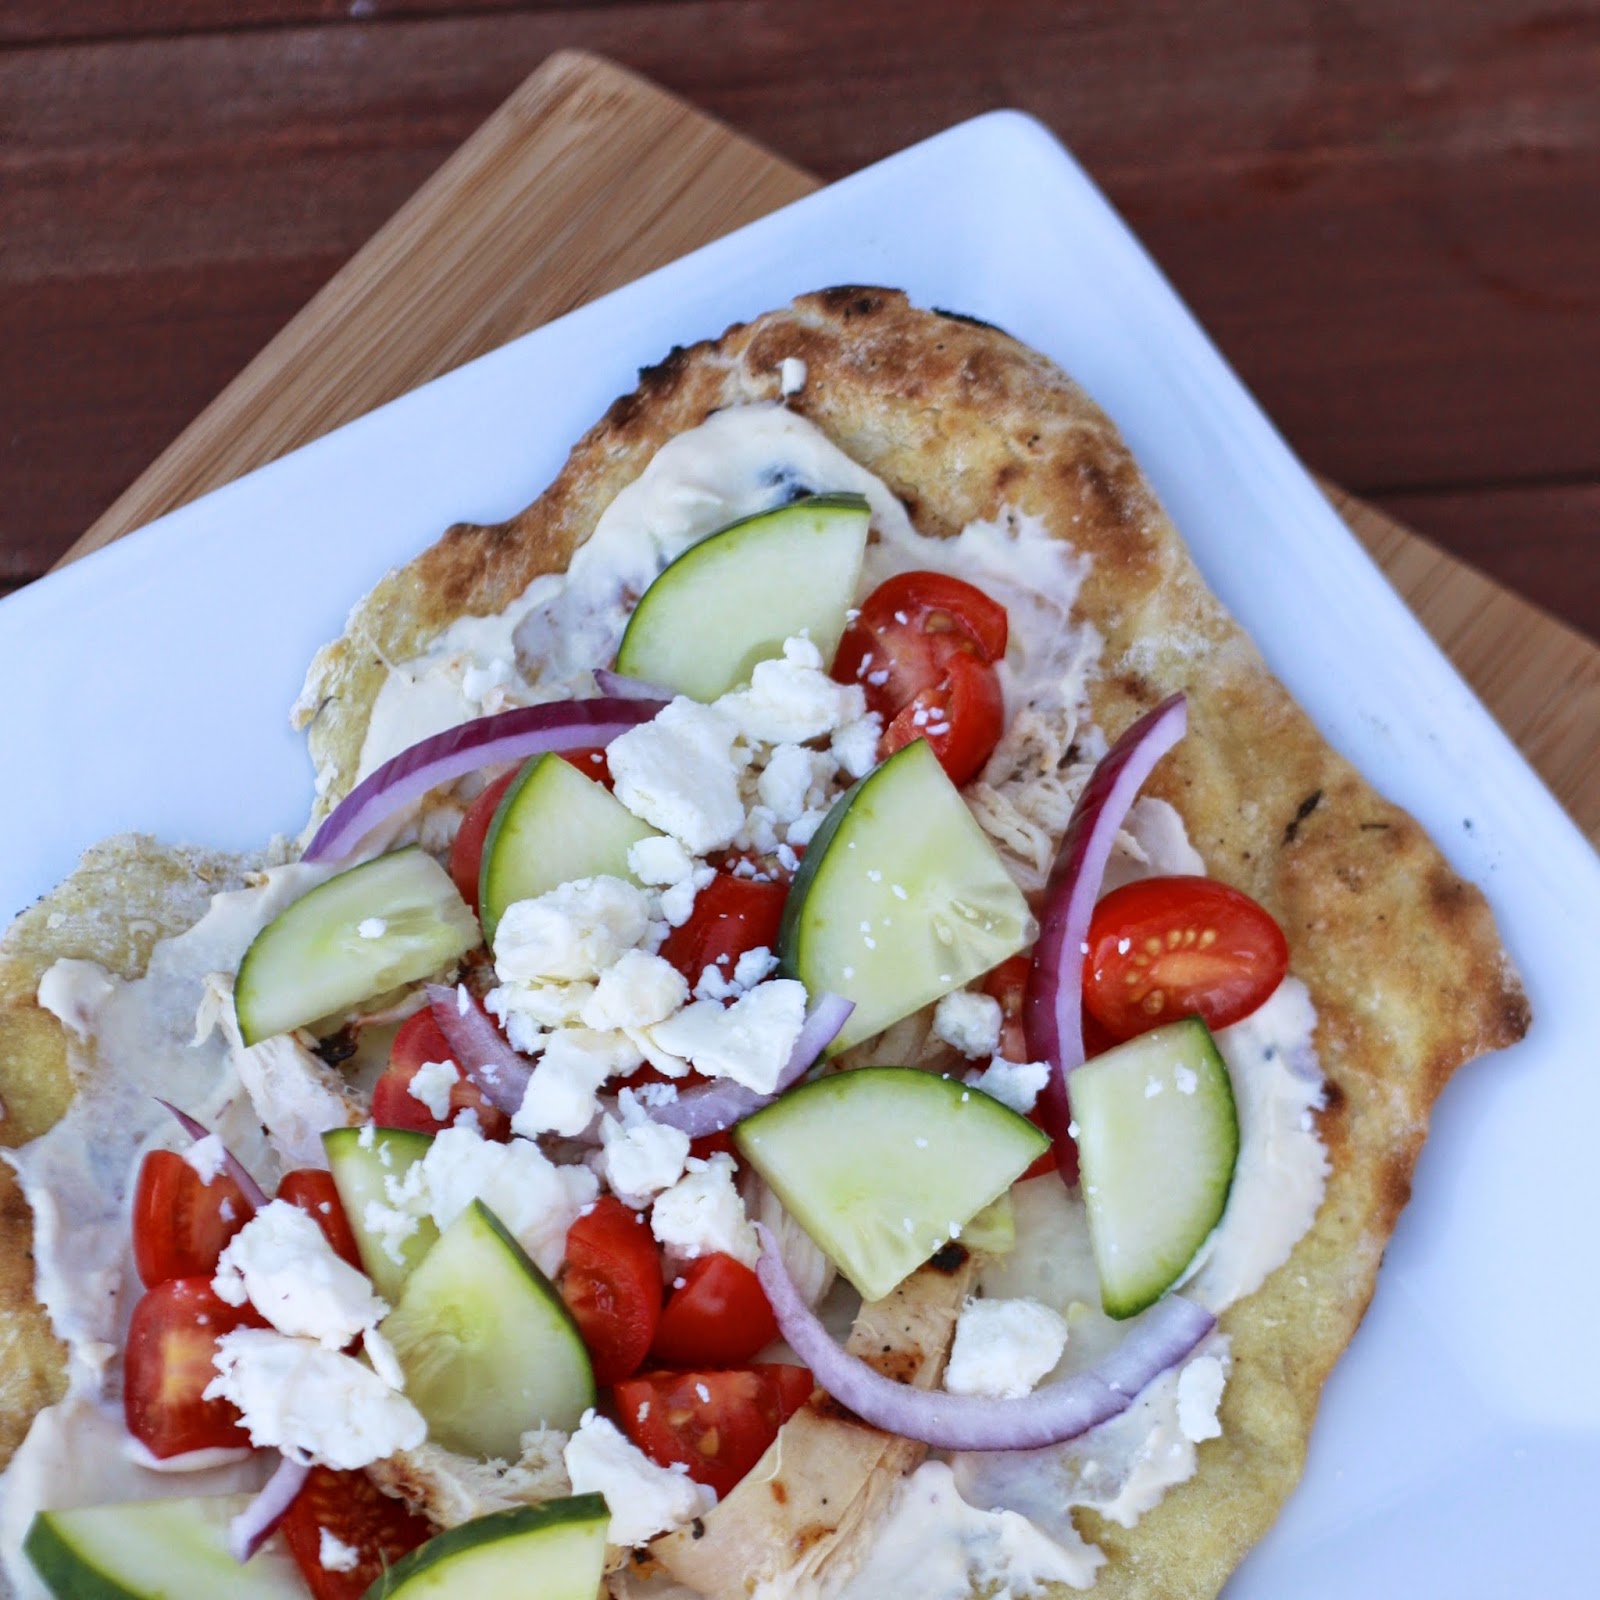 Grilled Chicken Flatbreads with Hummus and Feta | The Sweets Life